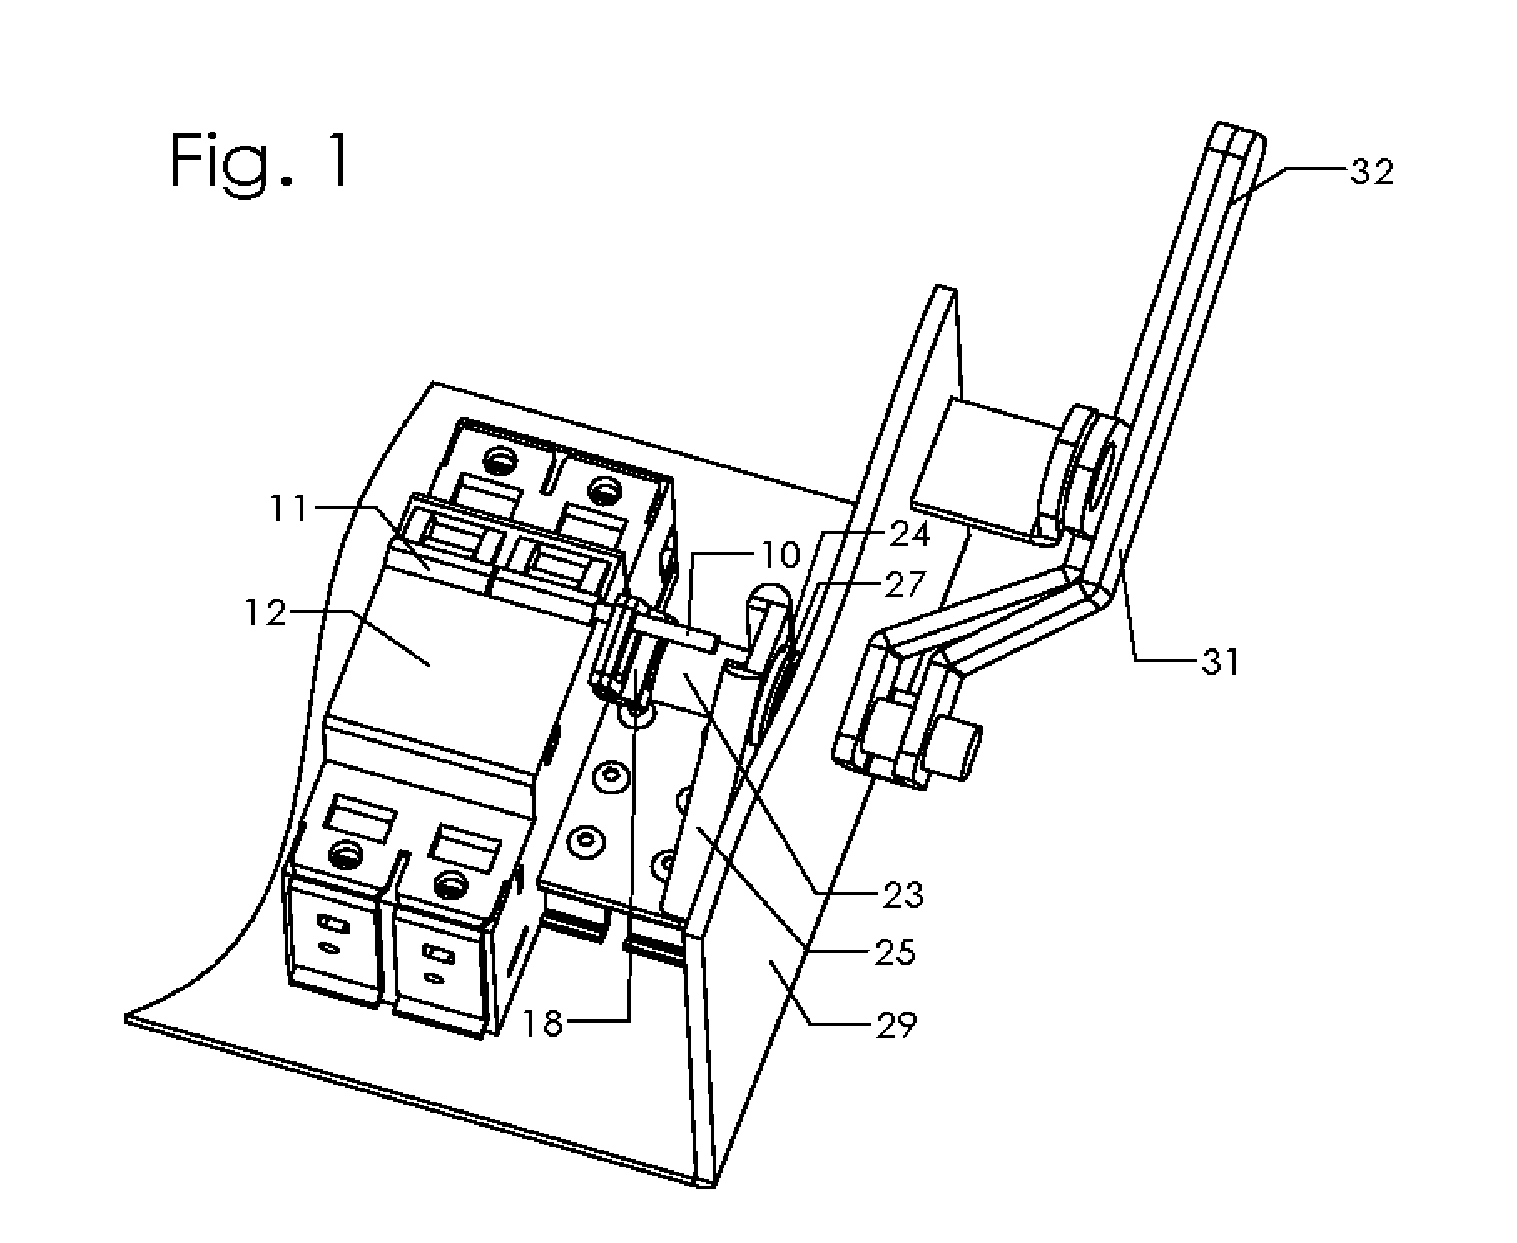 External disconnect mechanism integrated with an electrical system enclosure